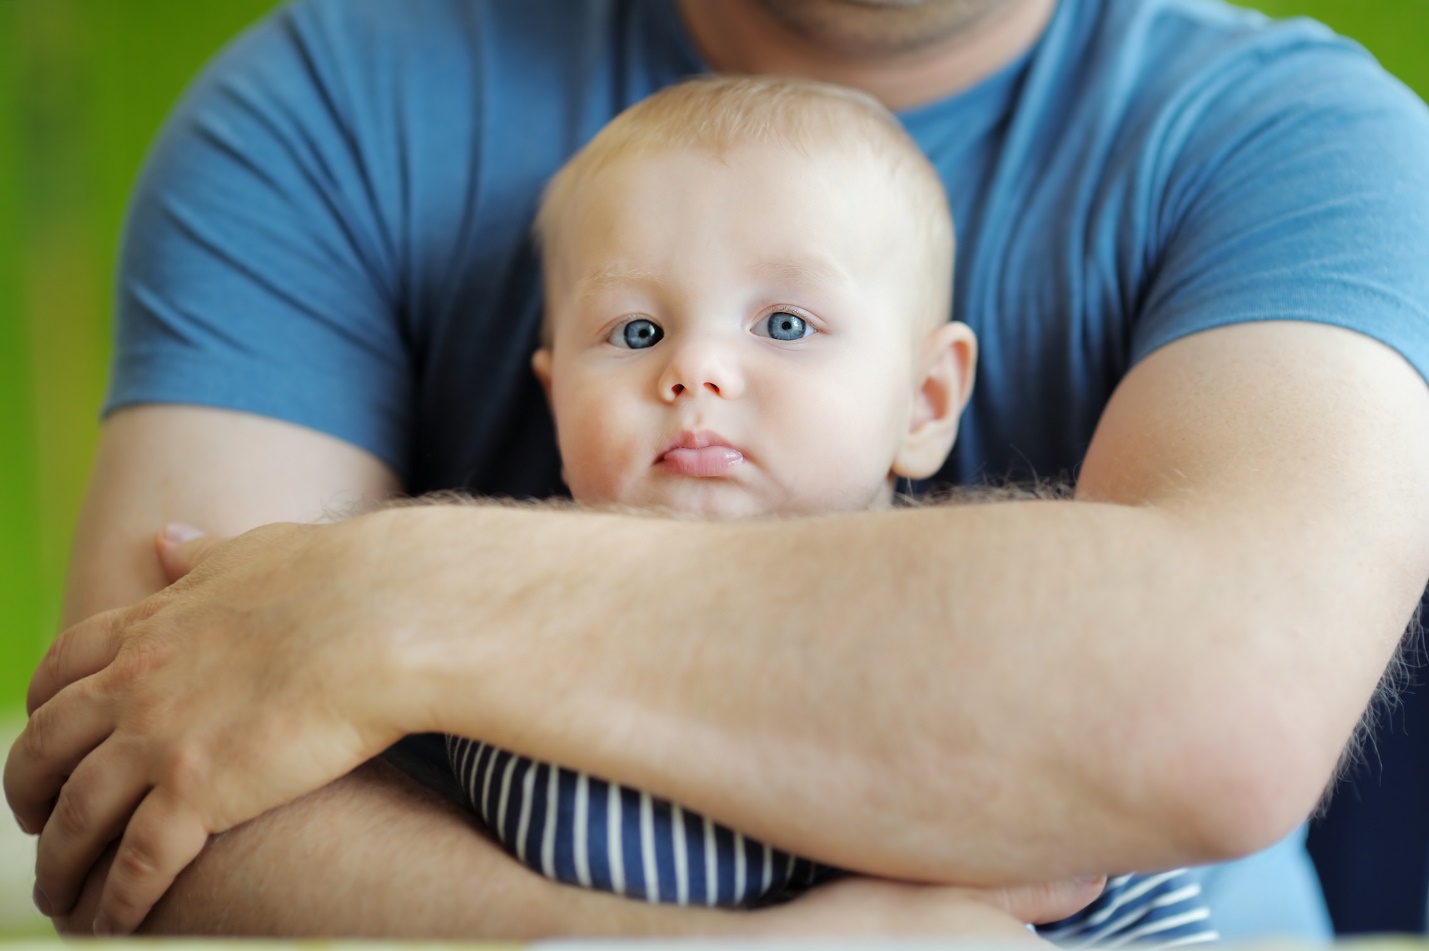 A baby being held by a person

Description automatically generated with medium confidence